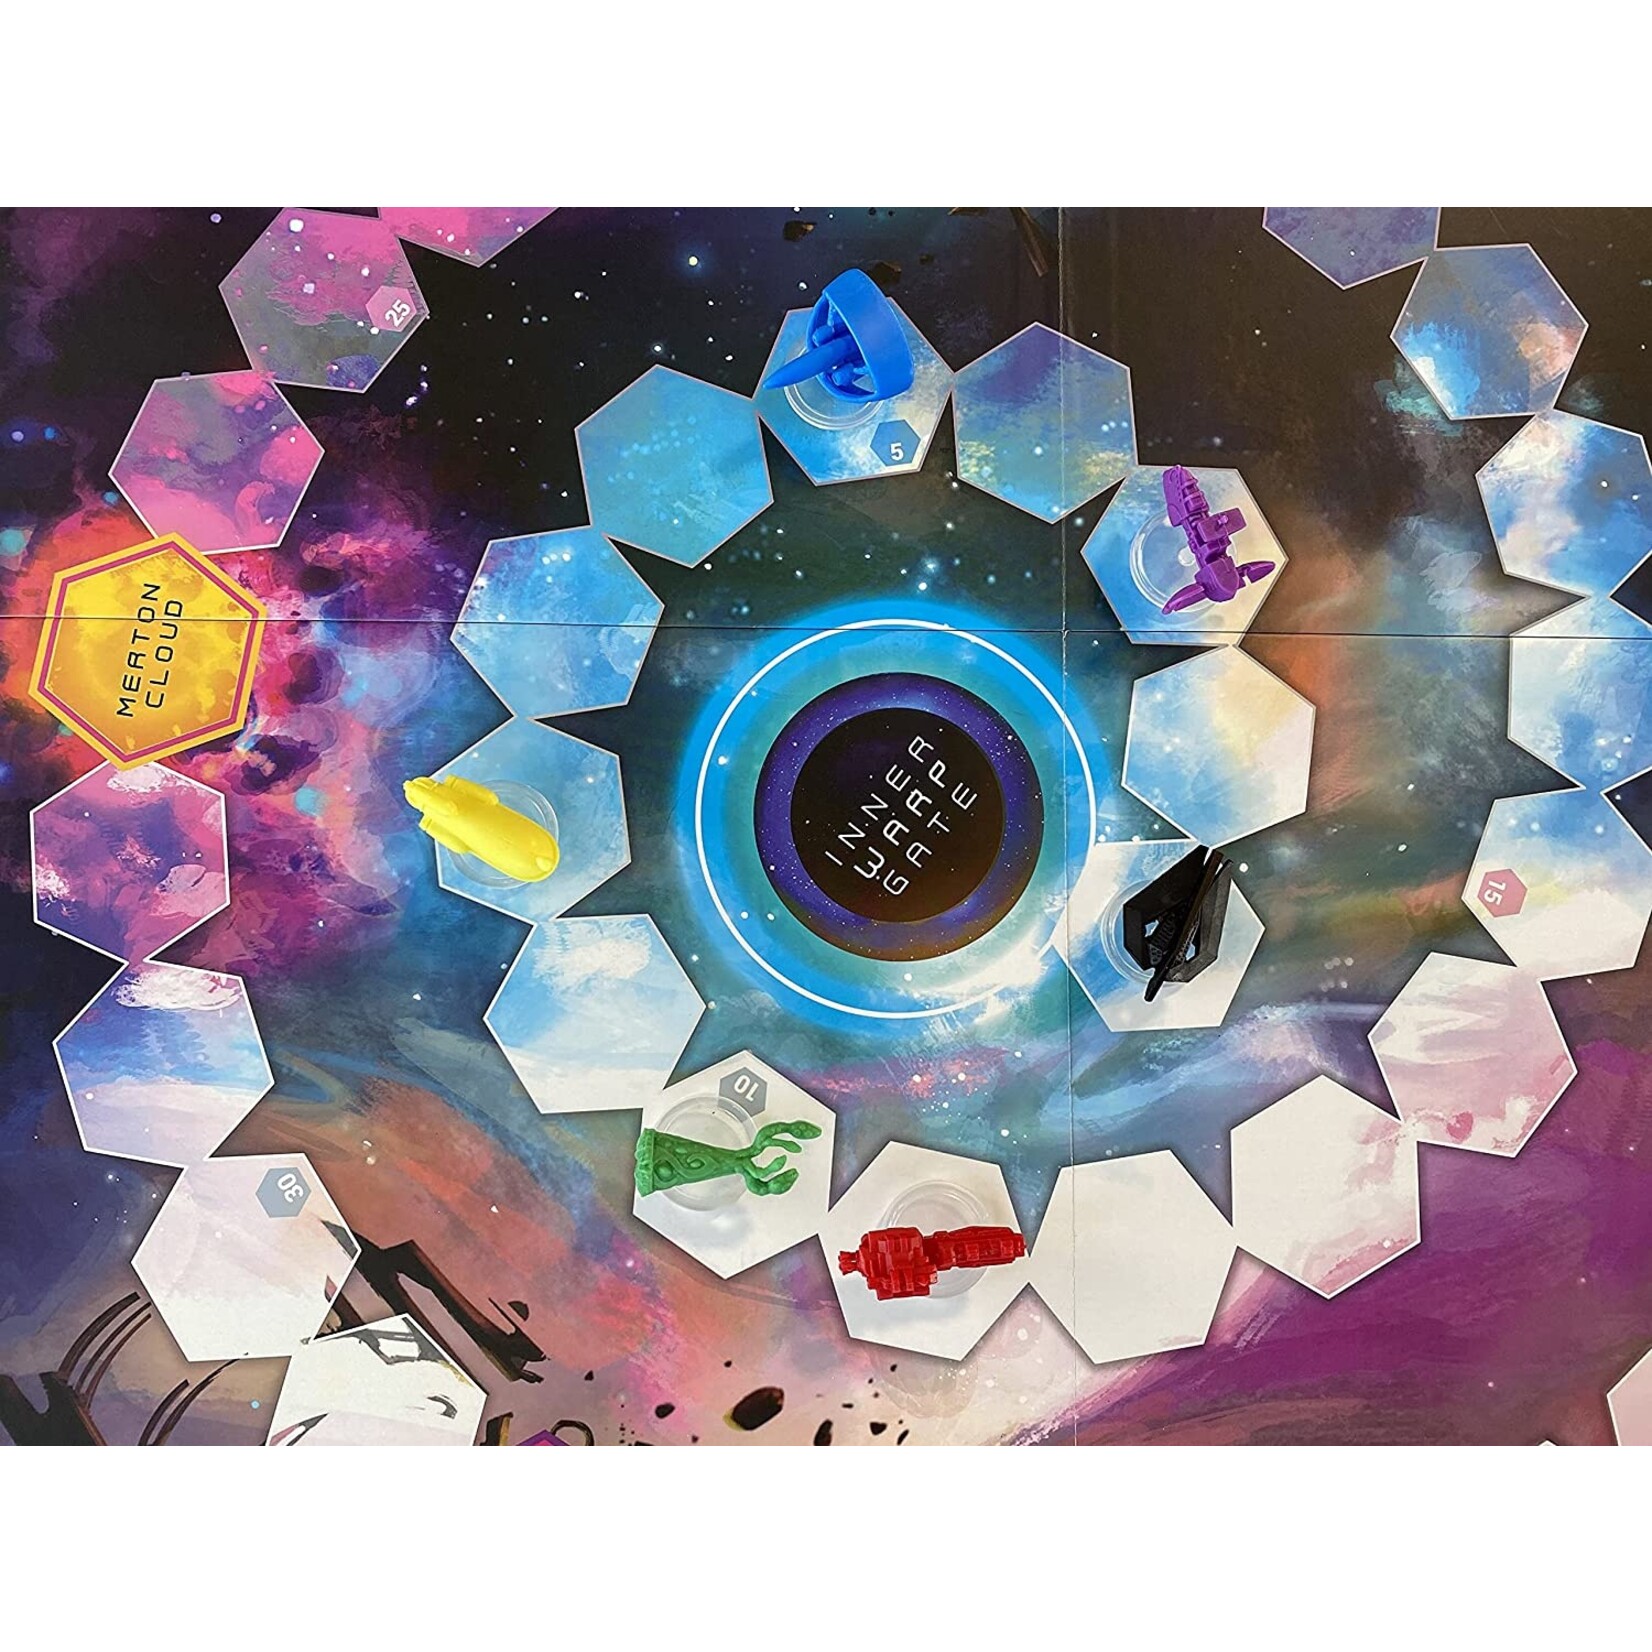 Renegade Game Studios Gravwell: 2nd Edition